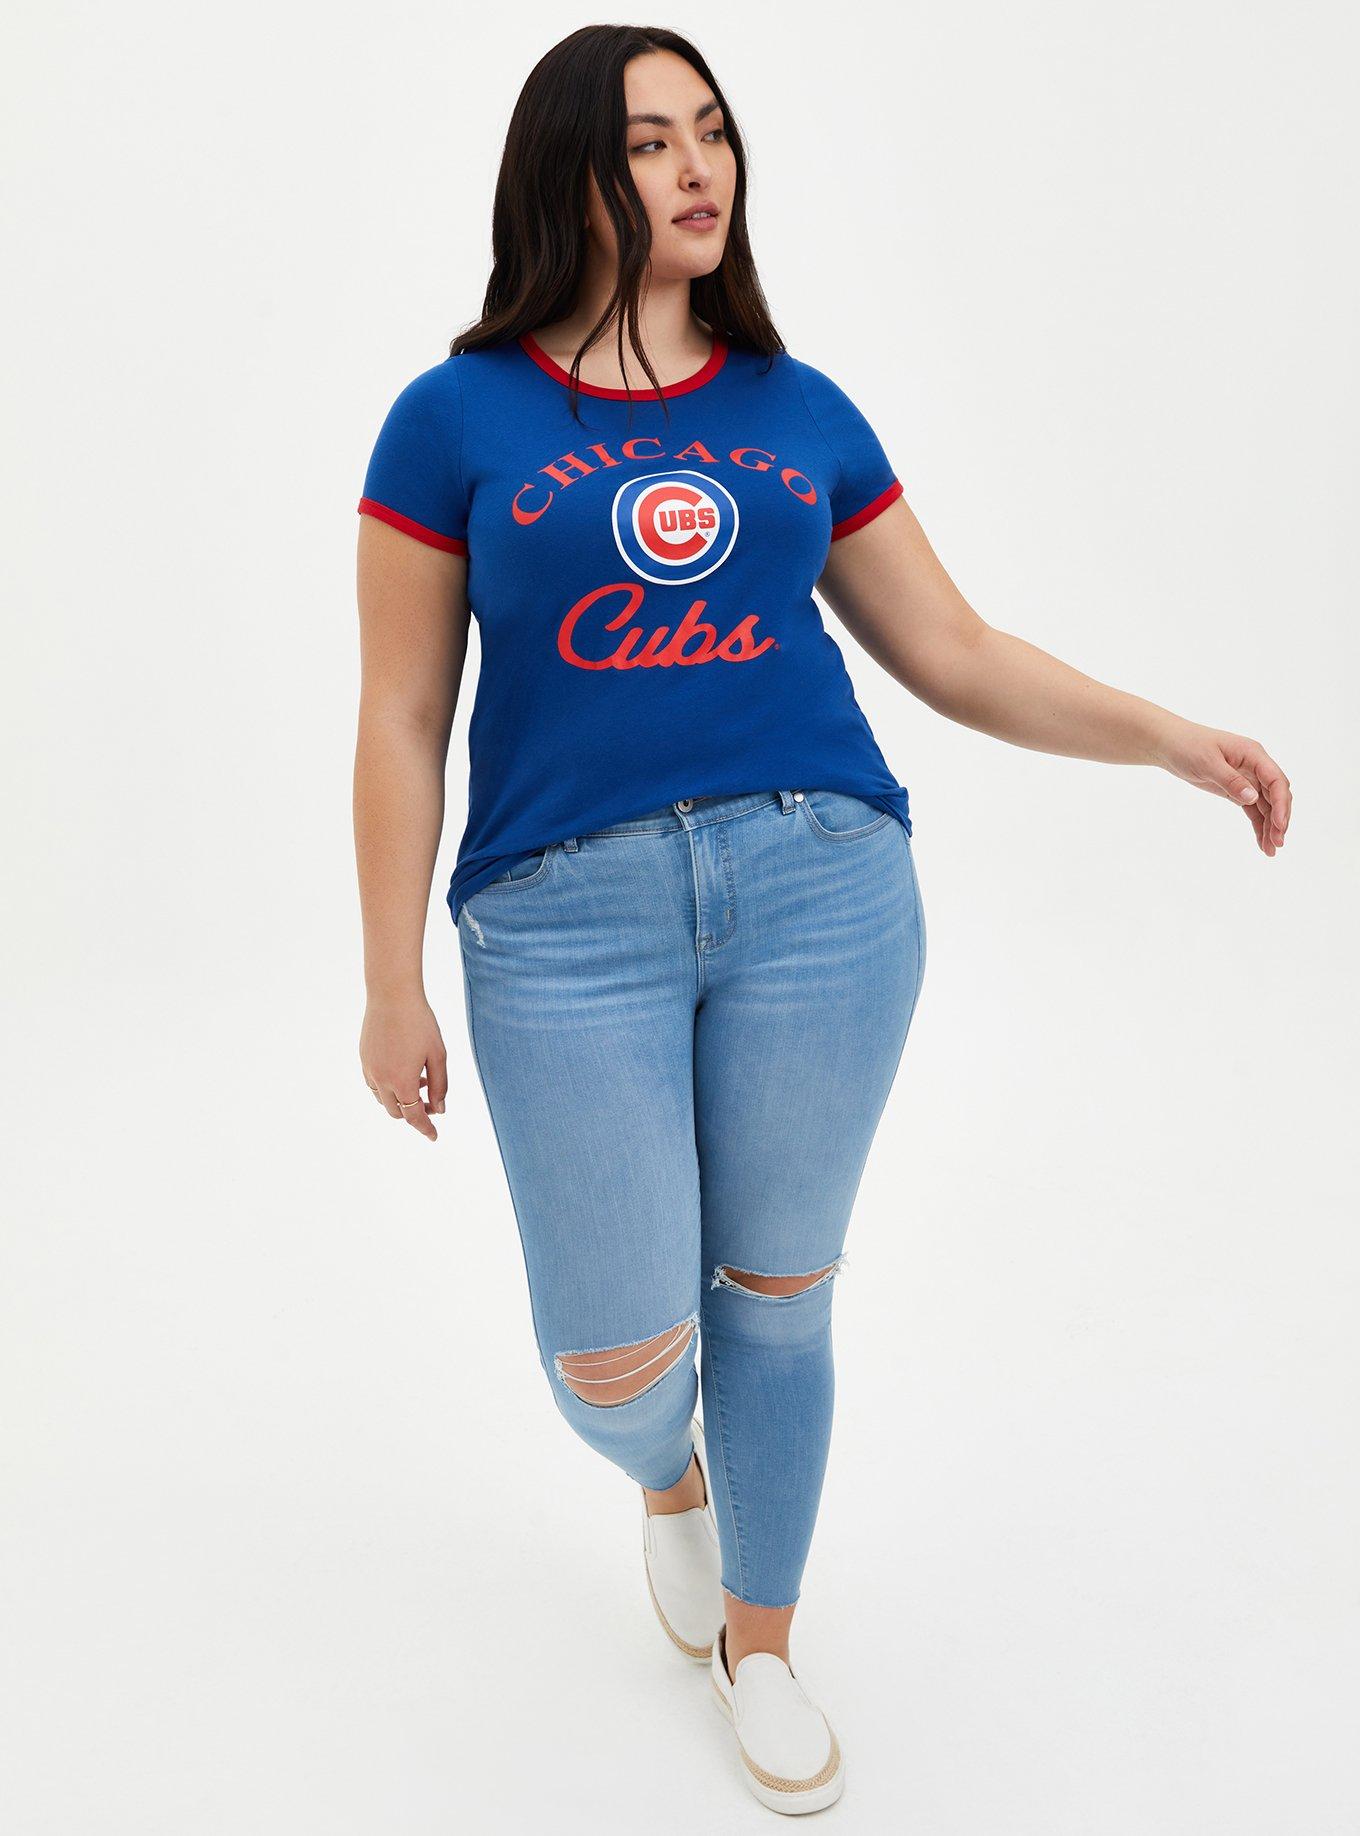 Plus Size - Classic Fit Ringer Tee - MLB Chicago Cubs Blue - Torrid